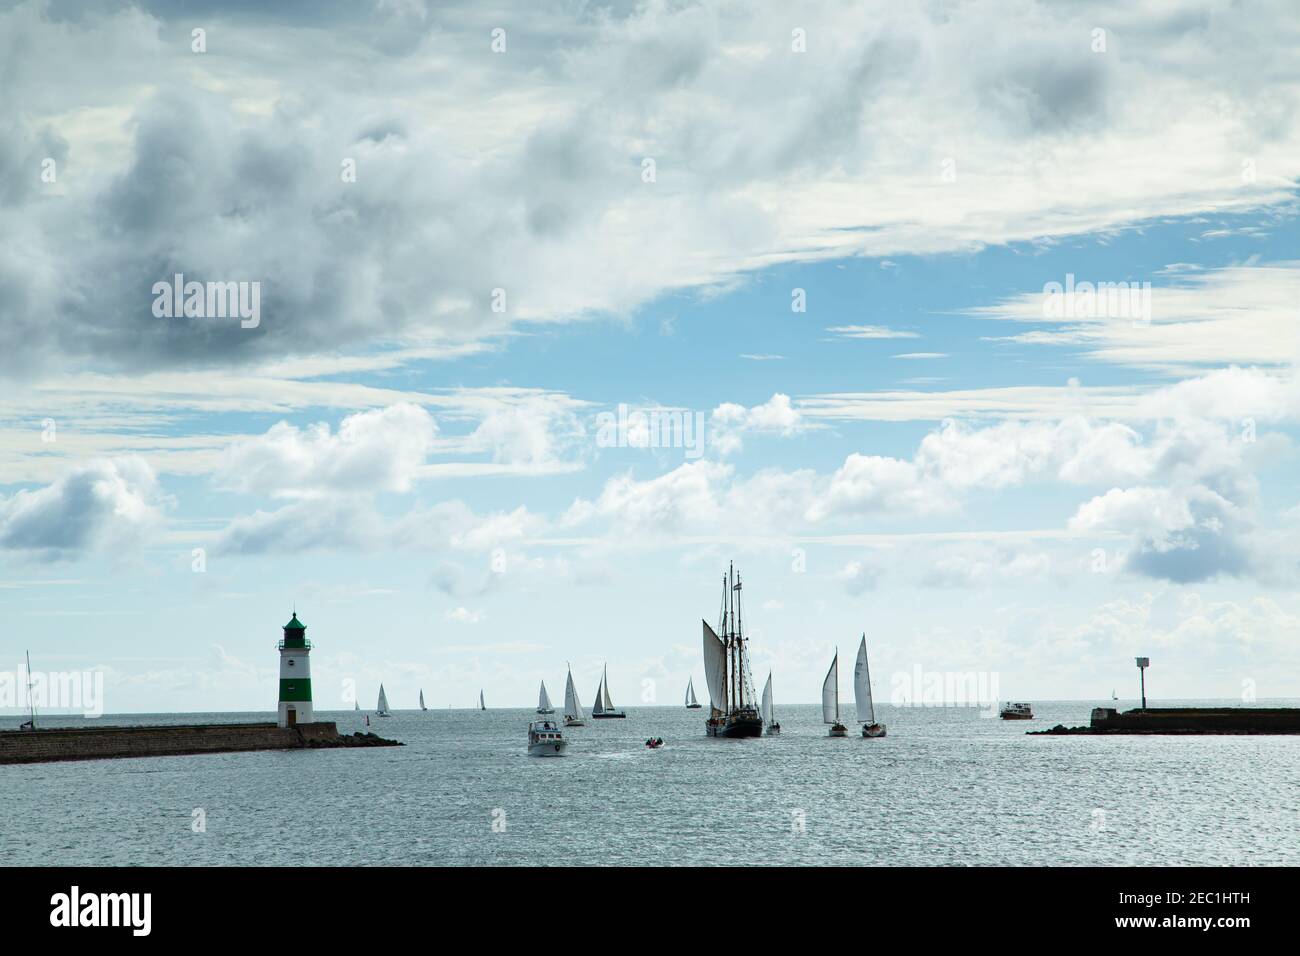 Sailboats,Lighthouse, Schleifjord, Fjord, Water, Baltic Sea, Schlei, Schleimuende, Clouds, Tourism Region, Water Reflection,Cloudy Sky, North Germany Stock Photo